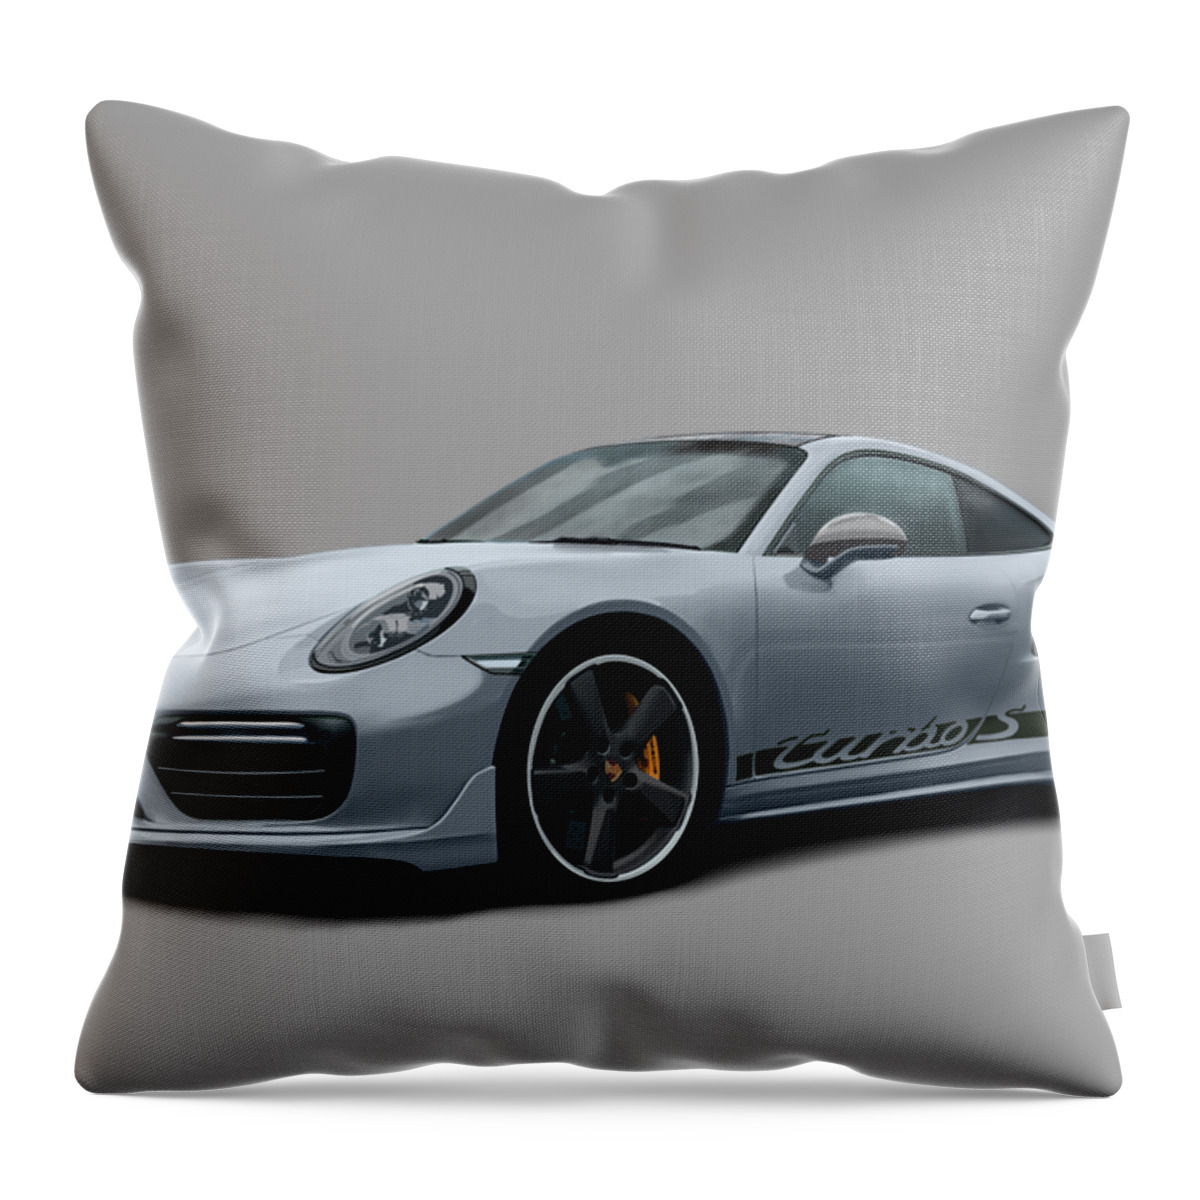 Hand Drawn Throw Pillow featuring the digital art Porsche 911 991 Turbo S Digitally Drawn - Grey with side decals script by Moospeed Art